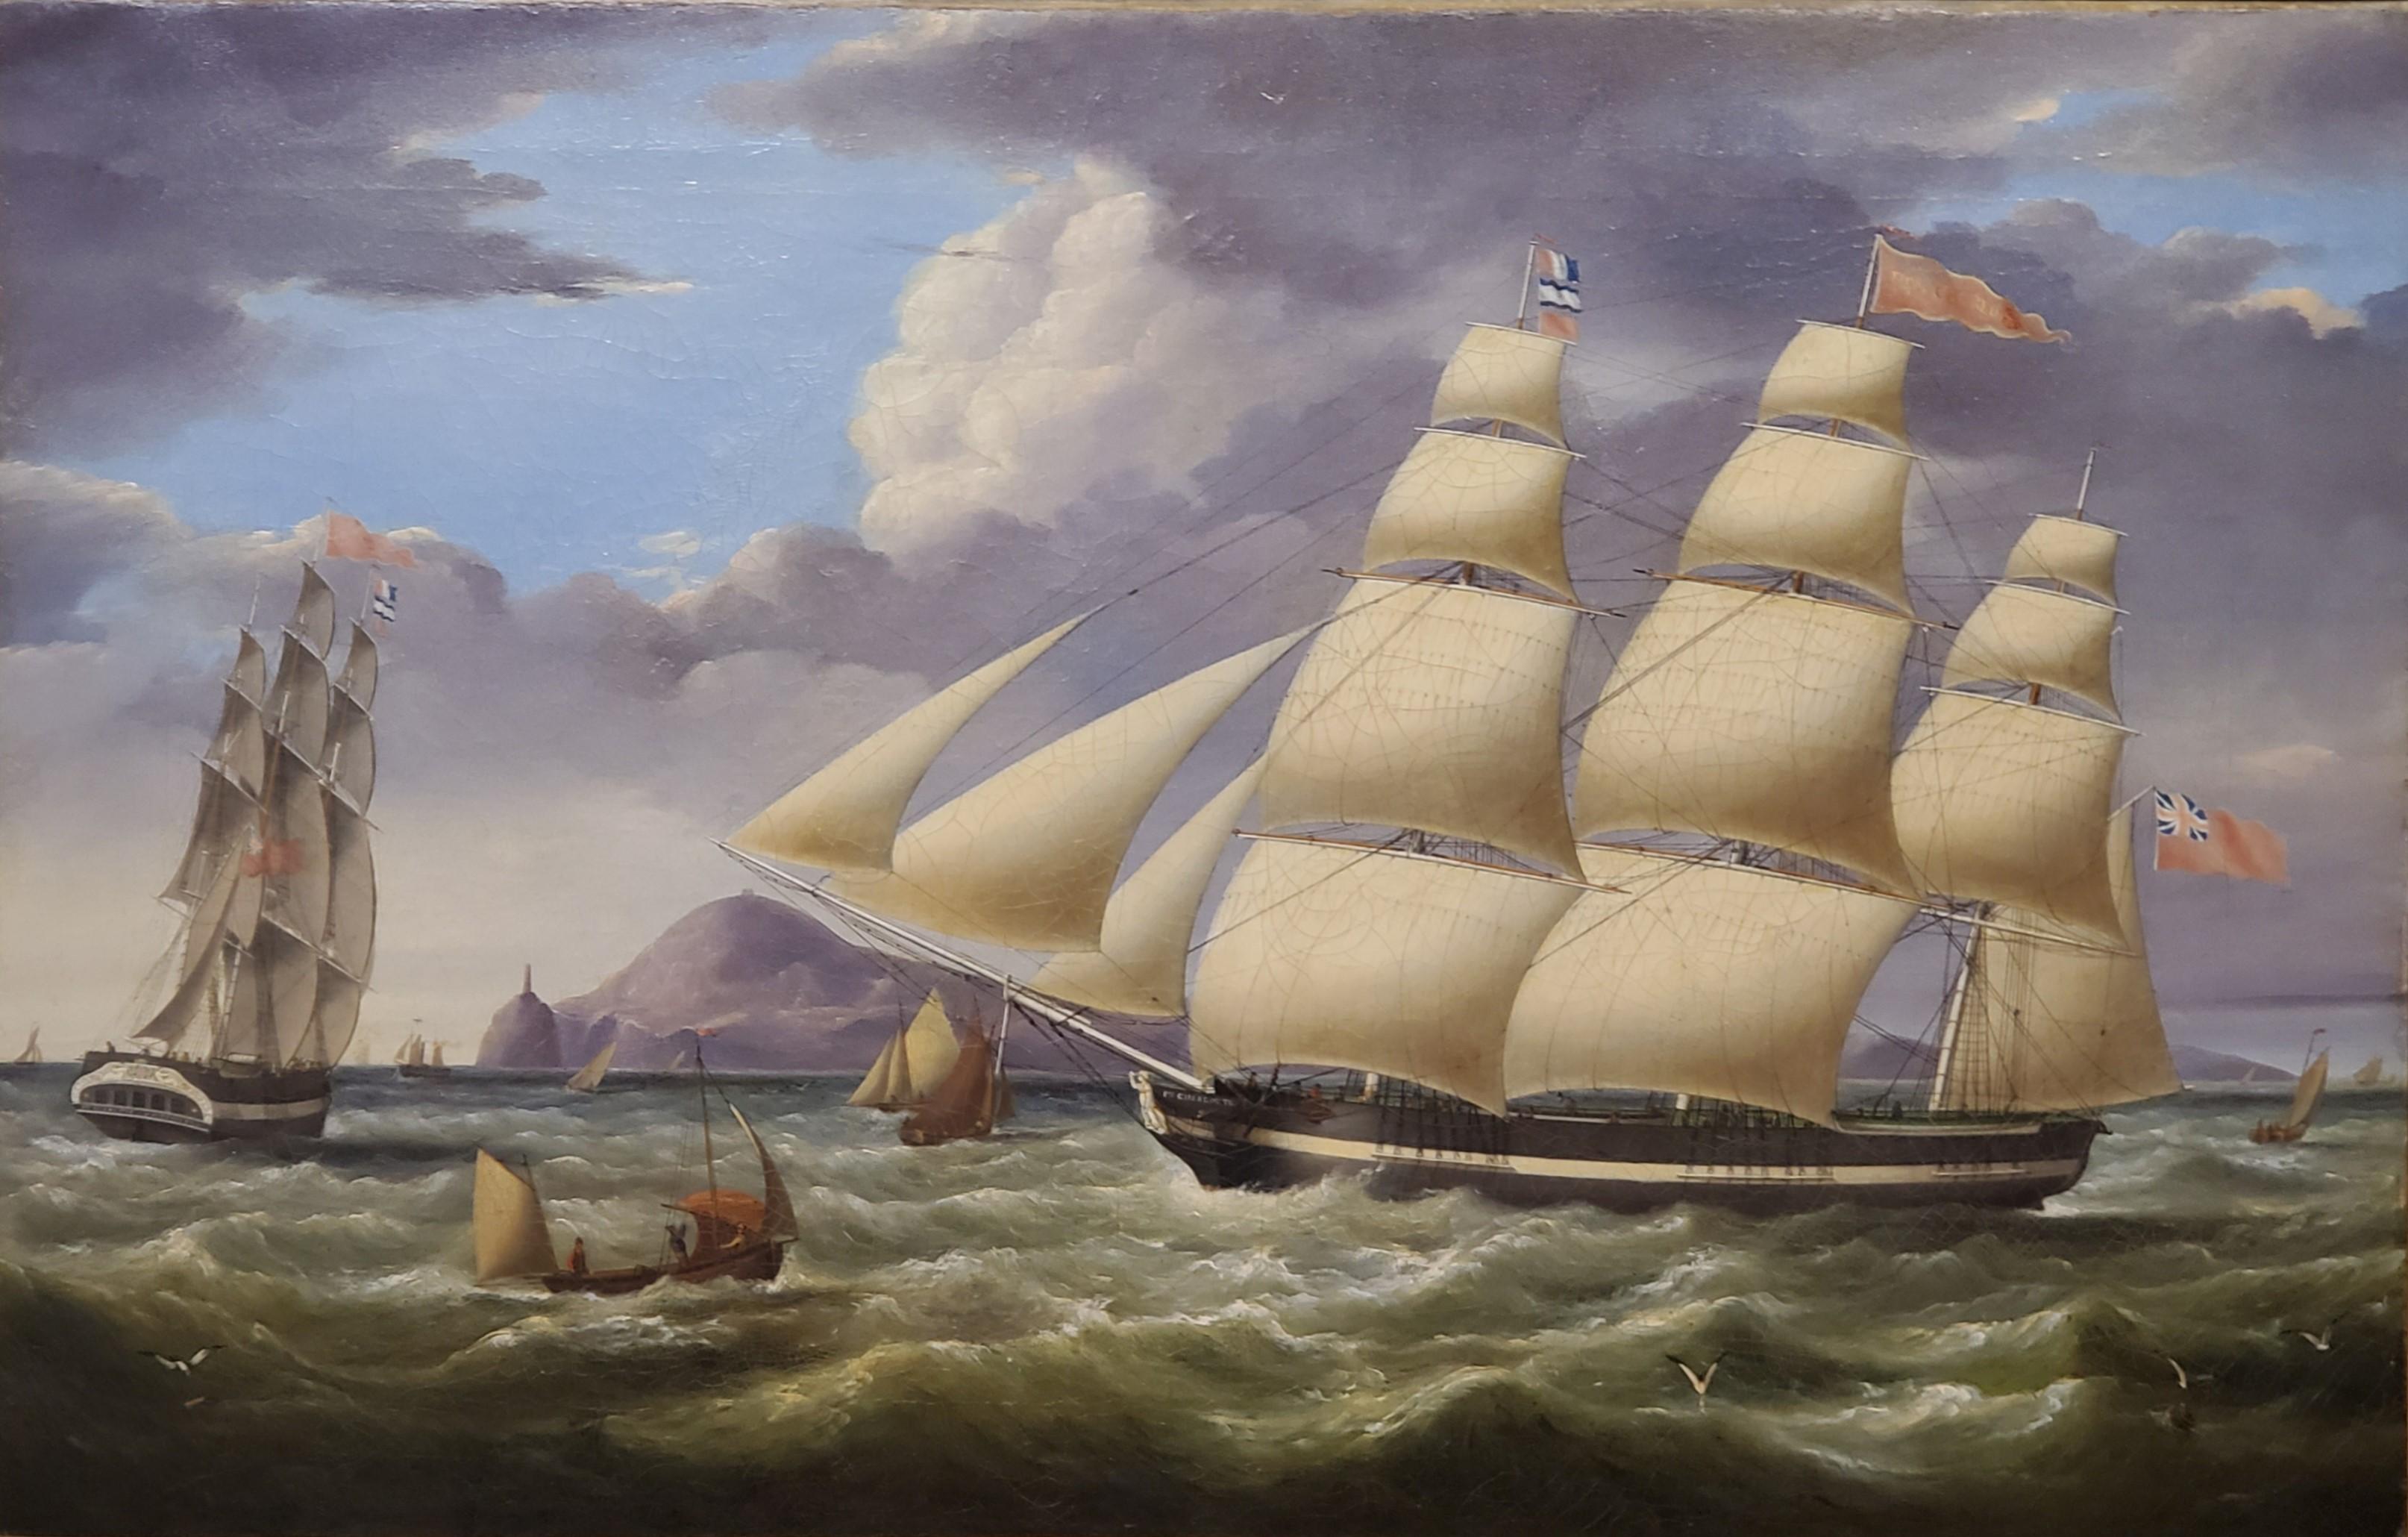 Princess Charlotte a Landscape Oil Painting of Ships Signed by Miles Walters

Marine view of the Princess Charlotte signed and dated by Miles Walters, British 1774-1849

24